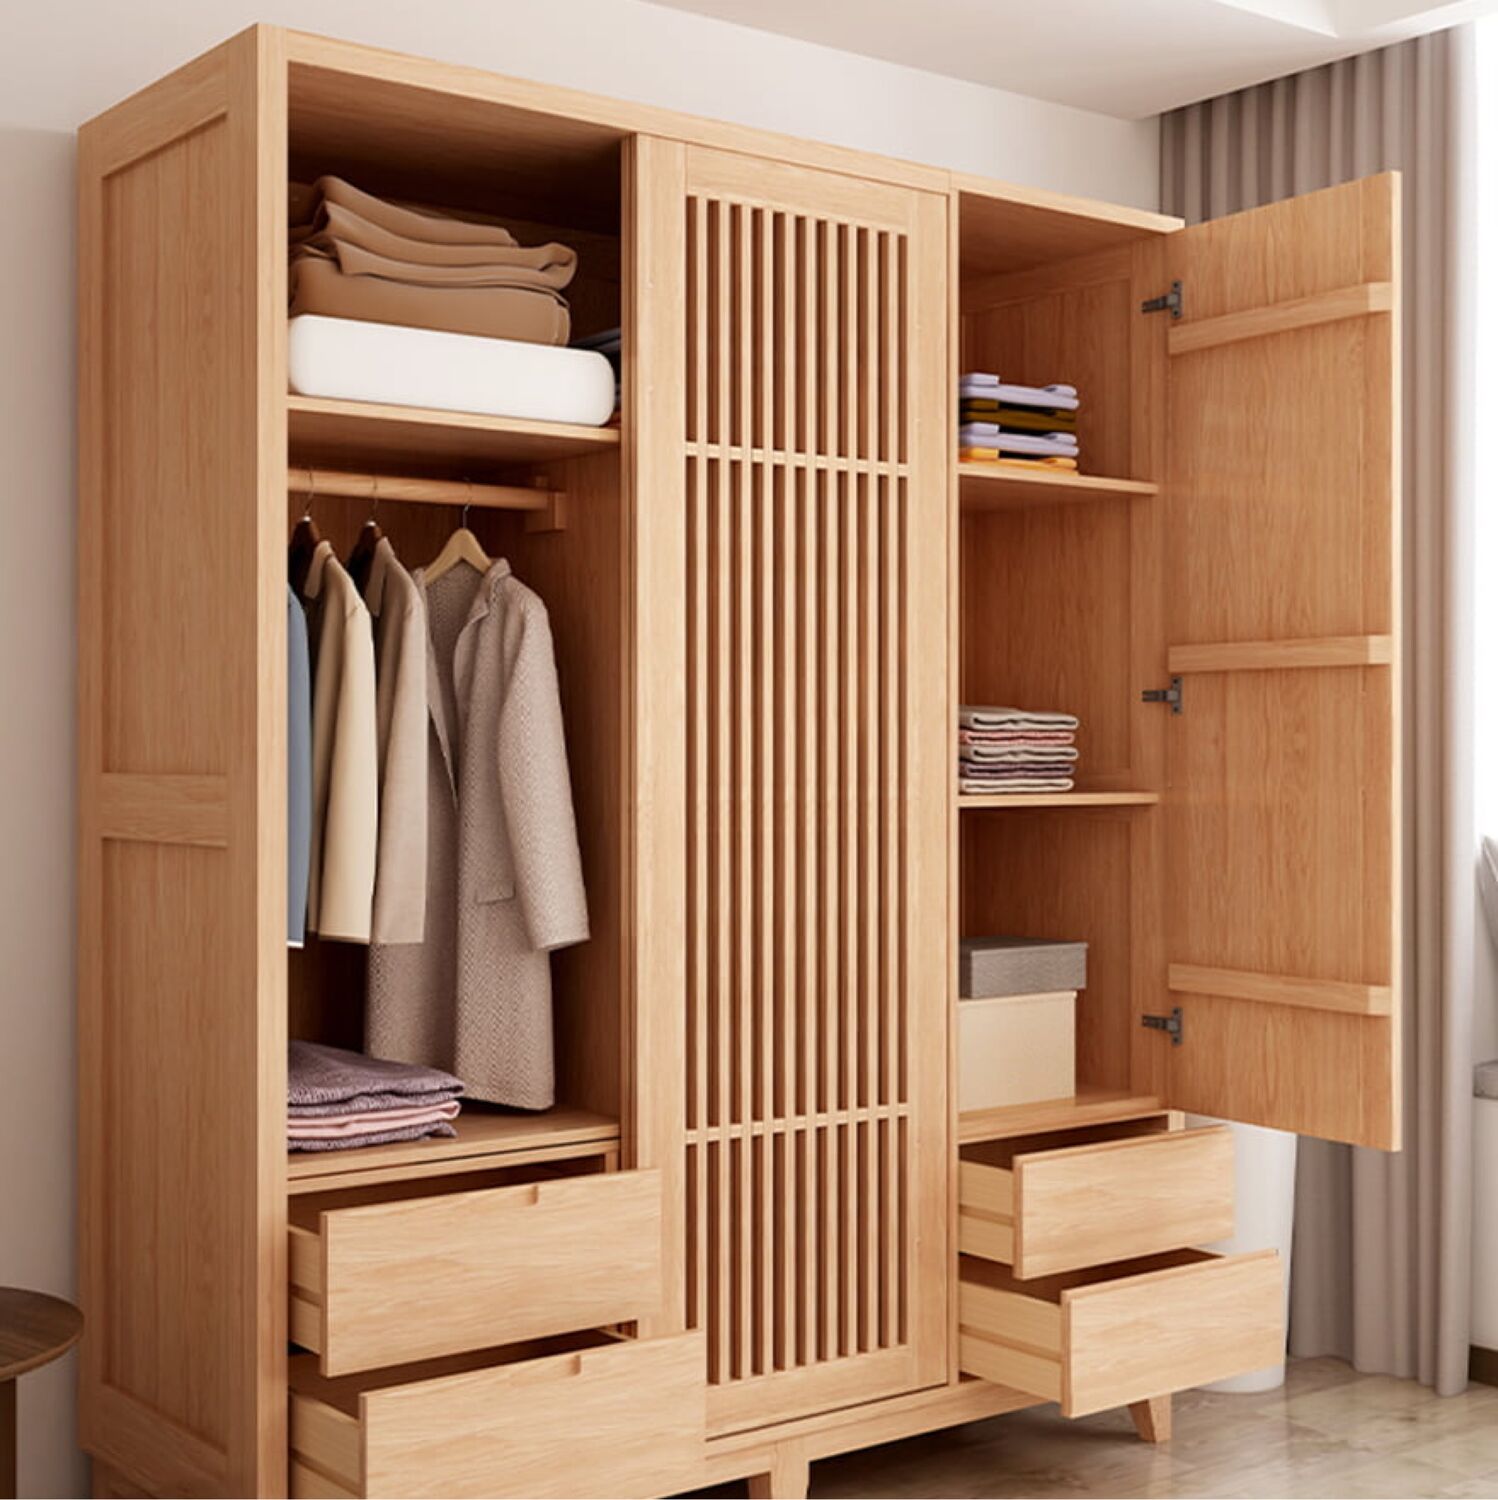 Https www mdm complect ru catalogue. Wooden opened Wardrobe.